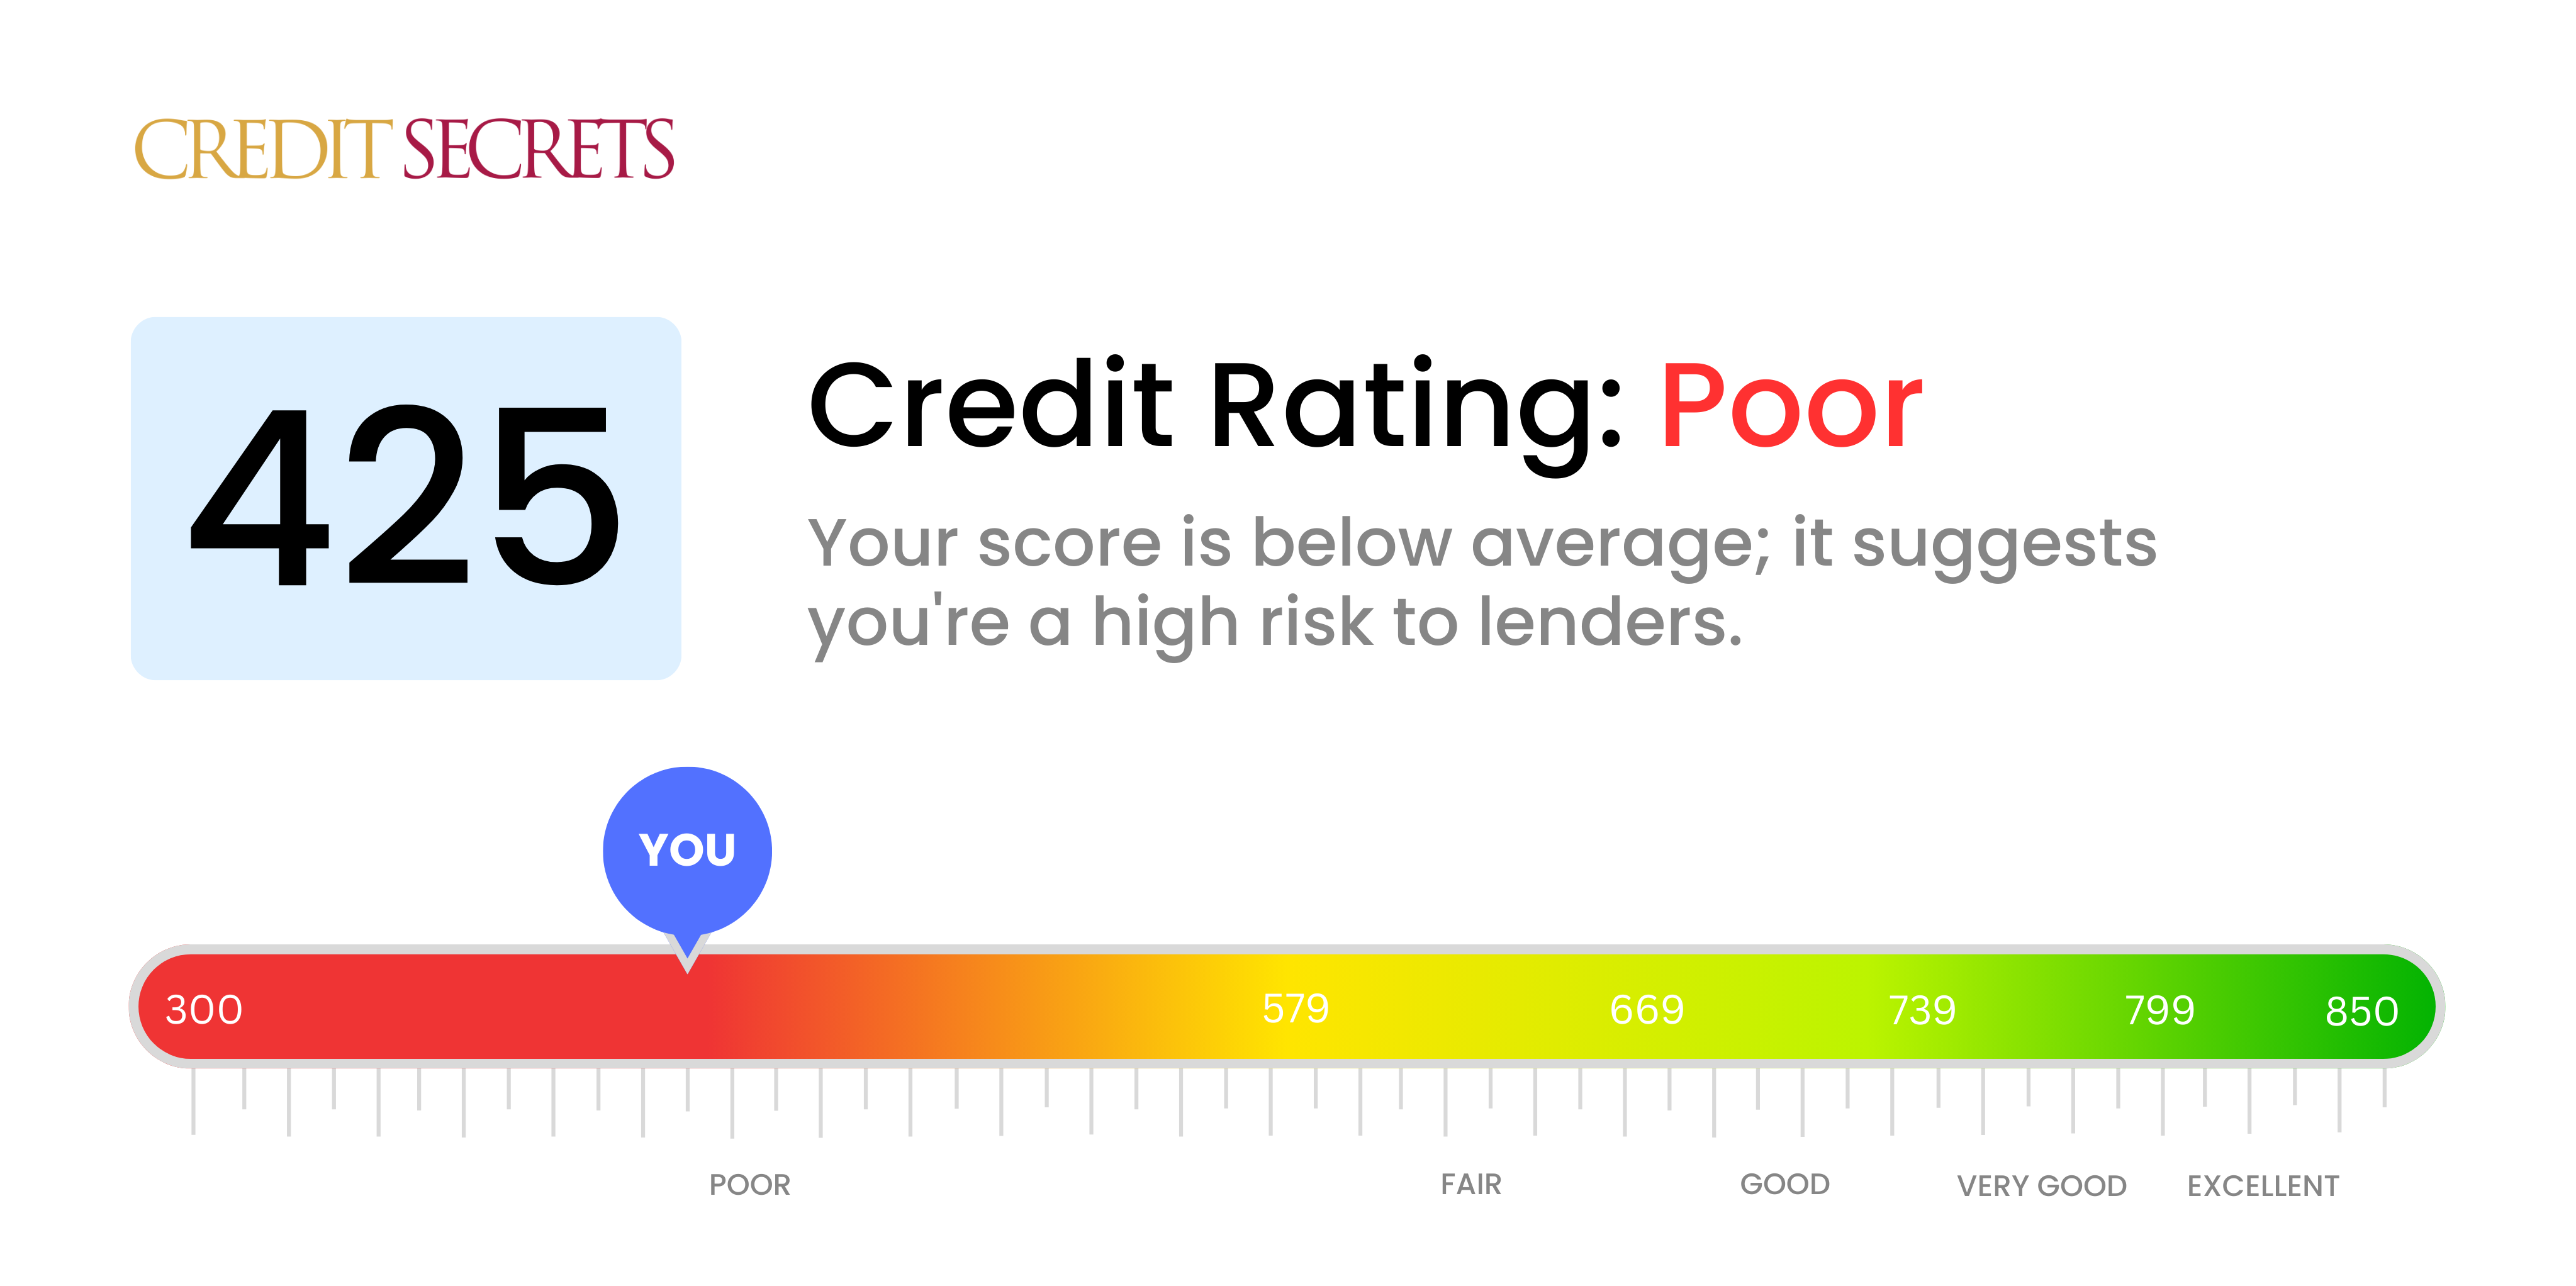 Is 425 a good credit score?